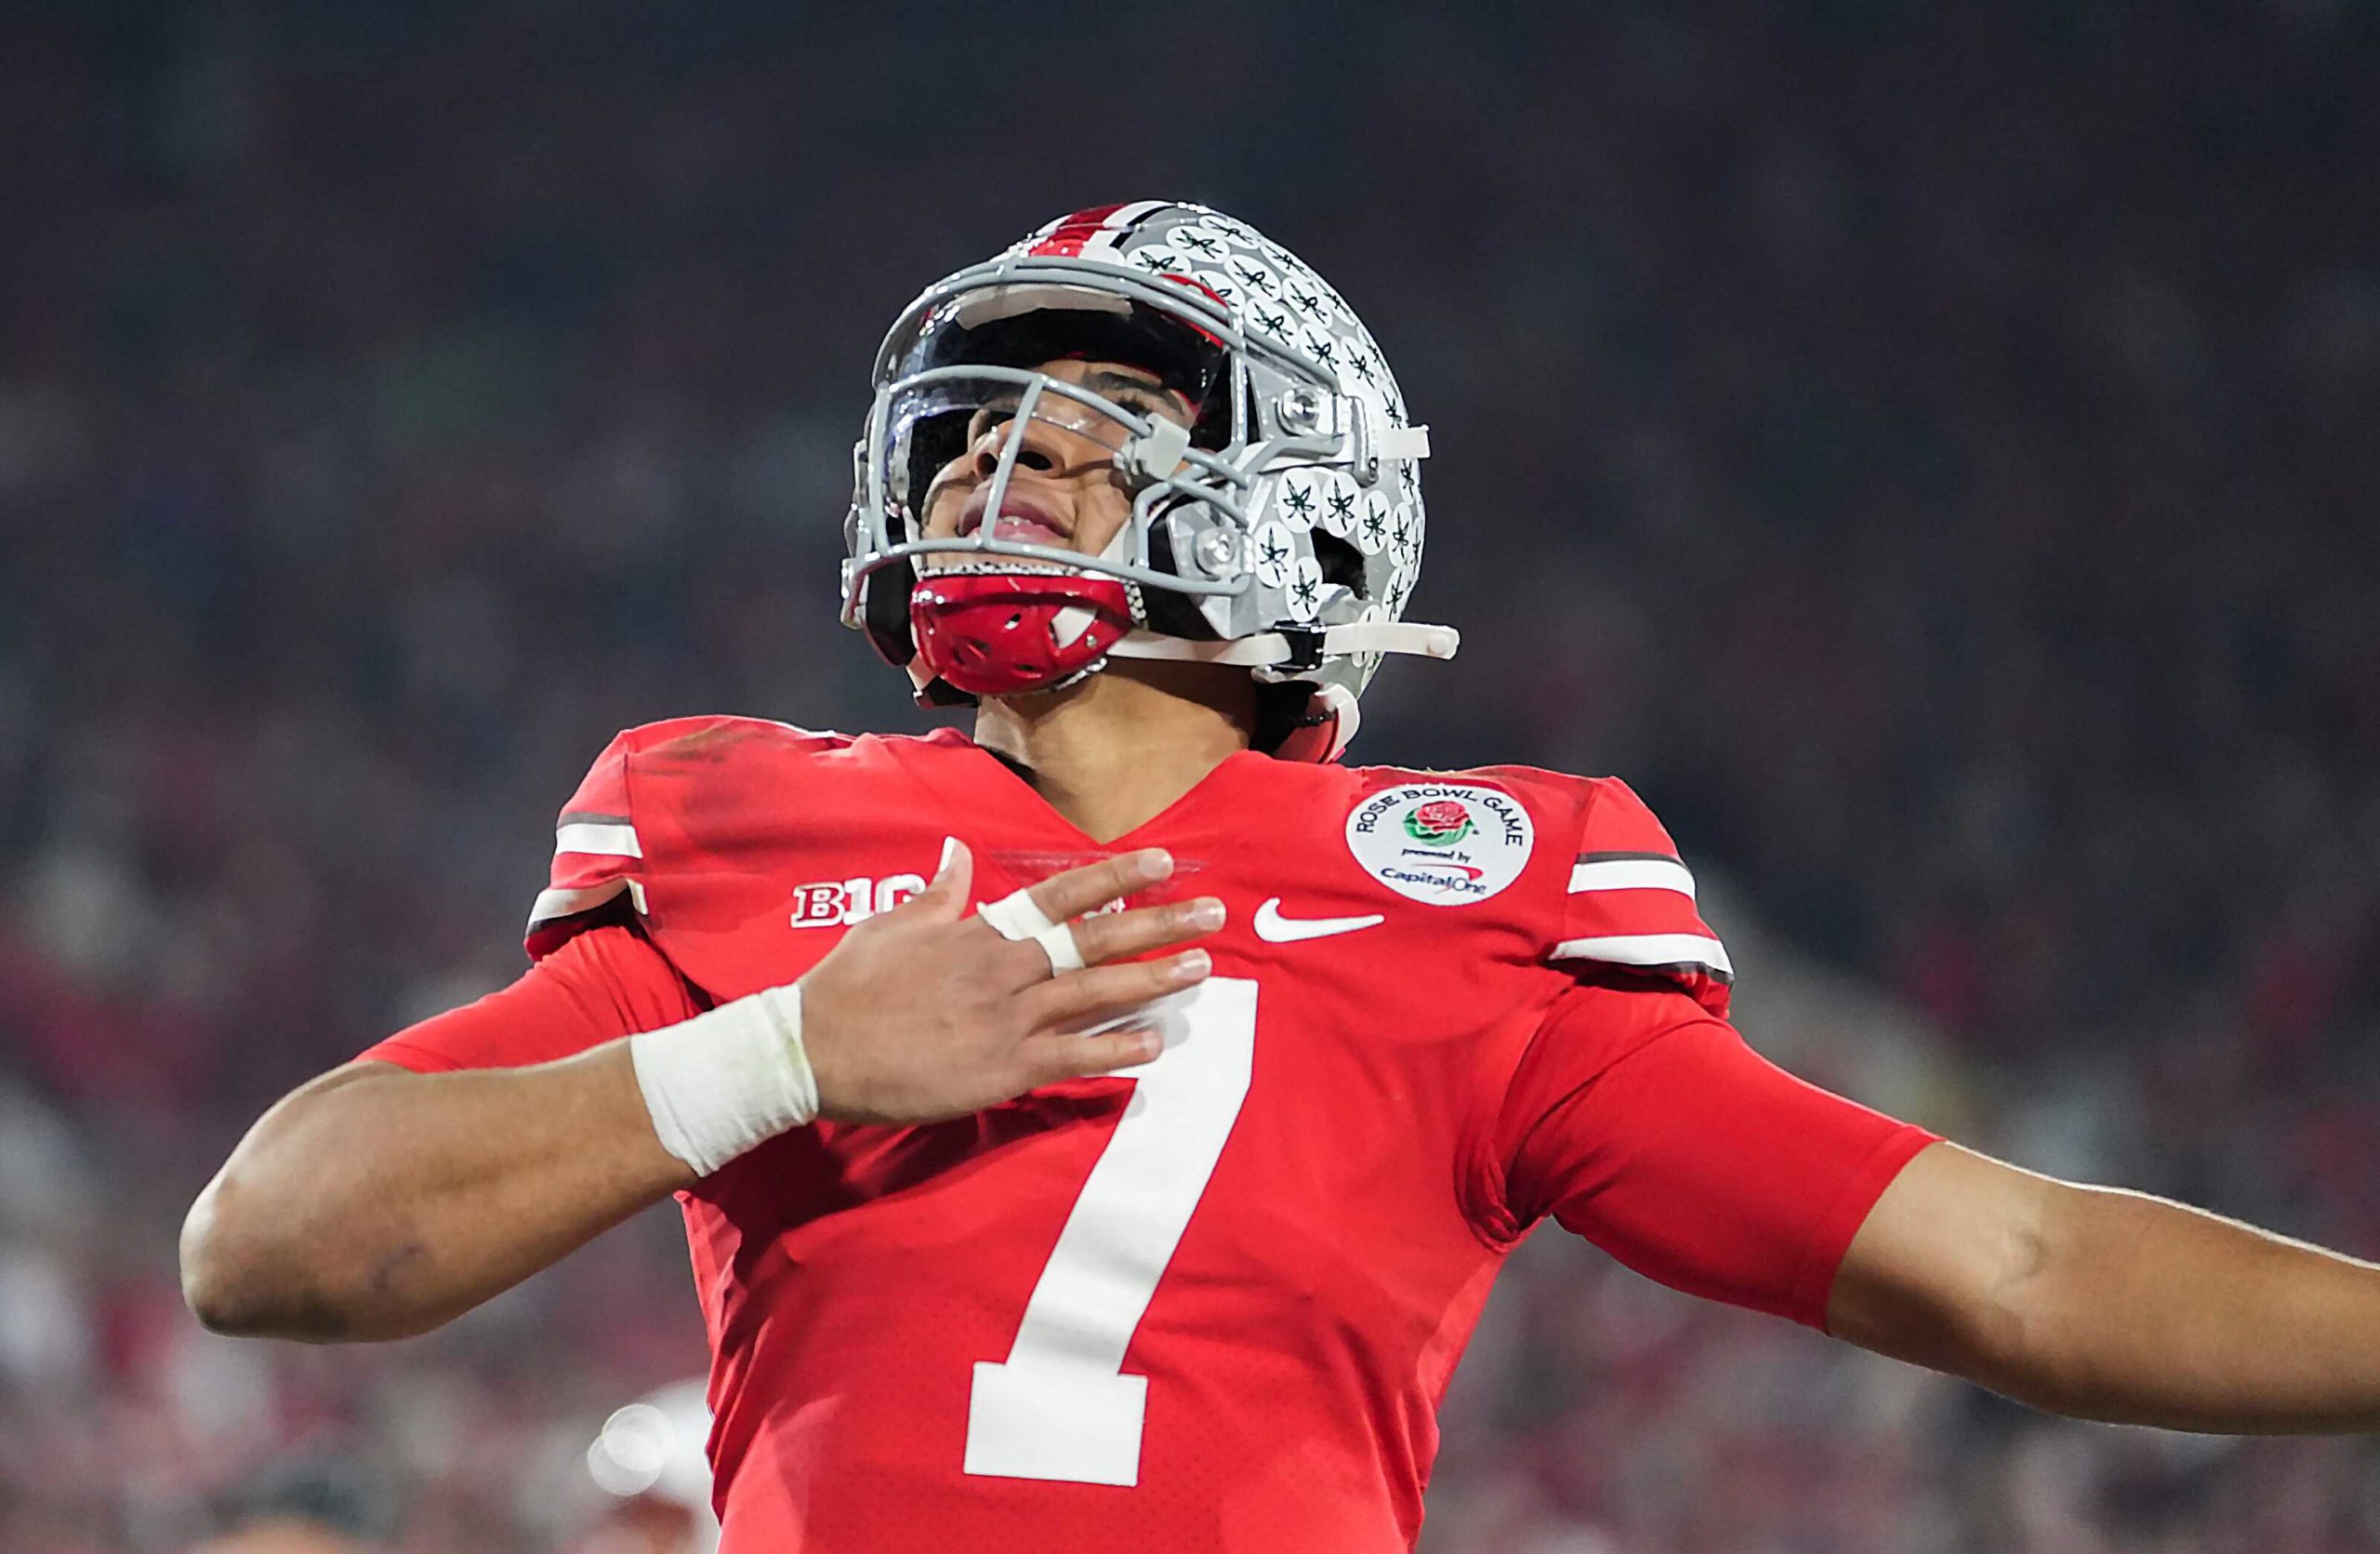 Ohio State Buckeyes quarterback C.J. Stroud celebrates after a touchdown during the 2021 Rose Bowl Game